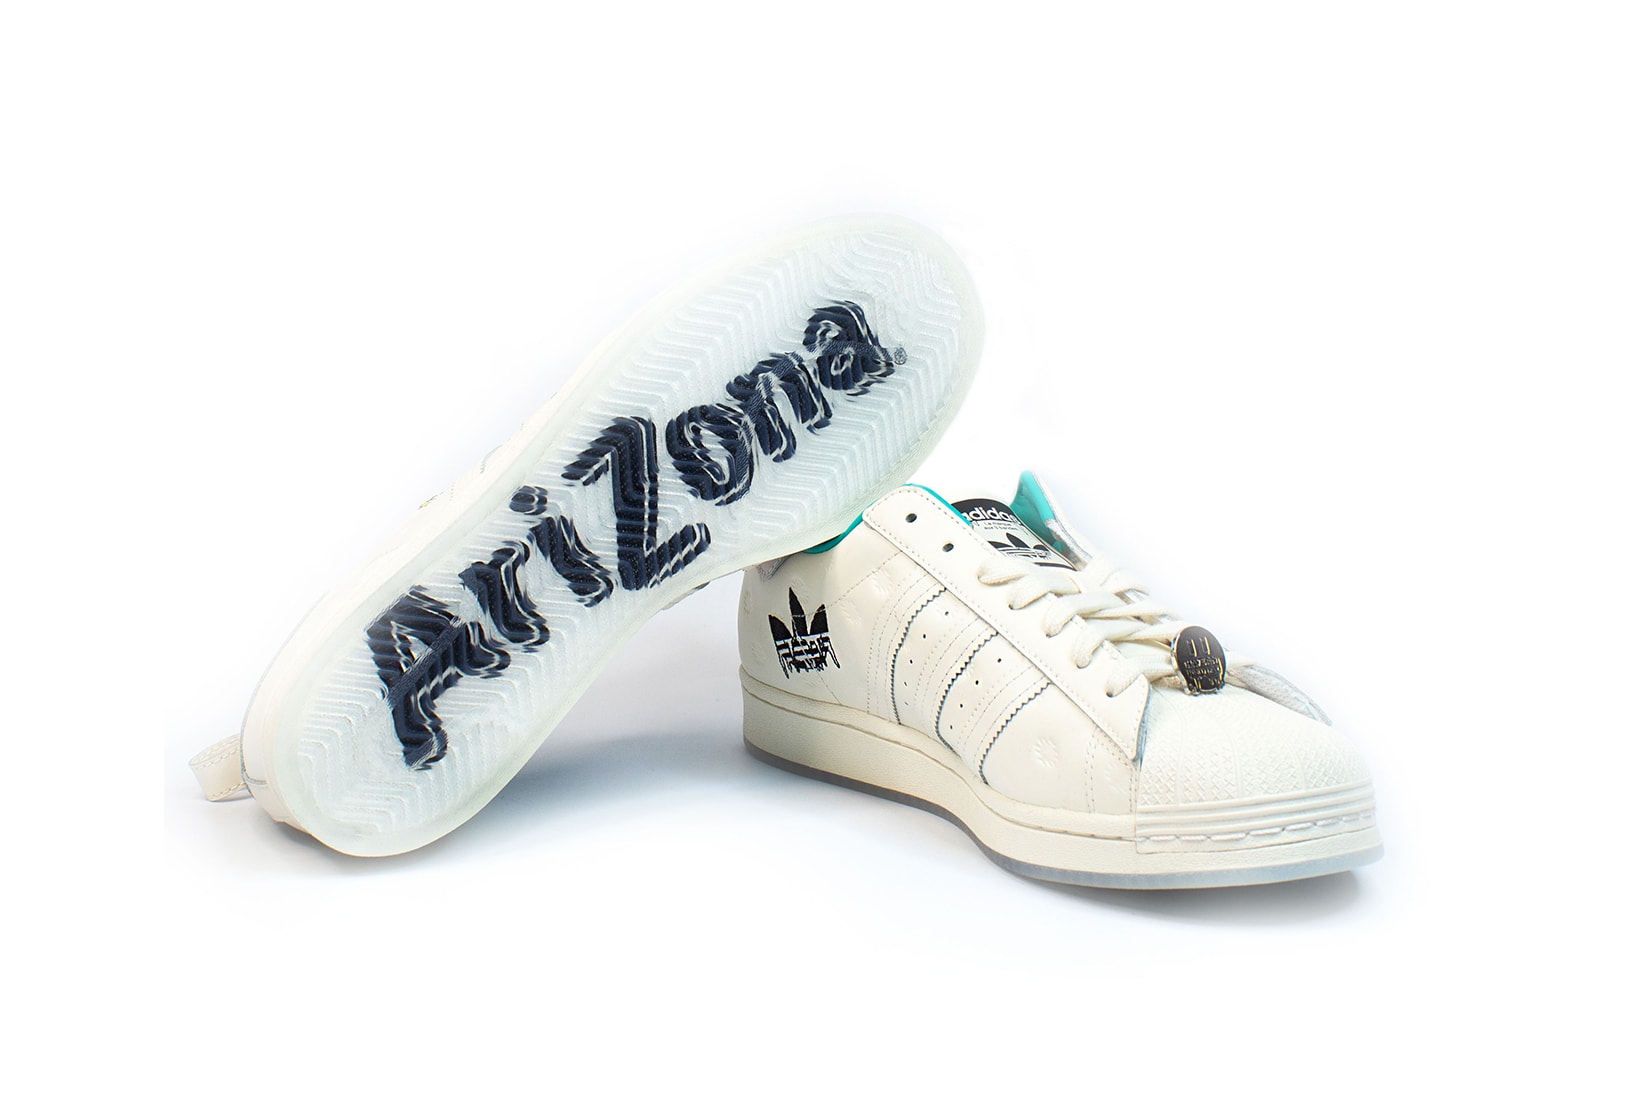 adidas originals arizona iced tea superstar collaboration sneakers big cans sole black white laces gold teal blue